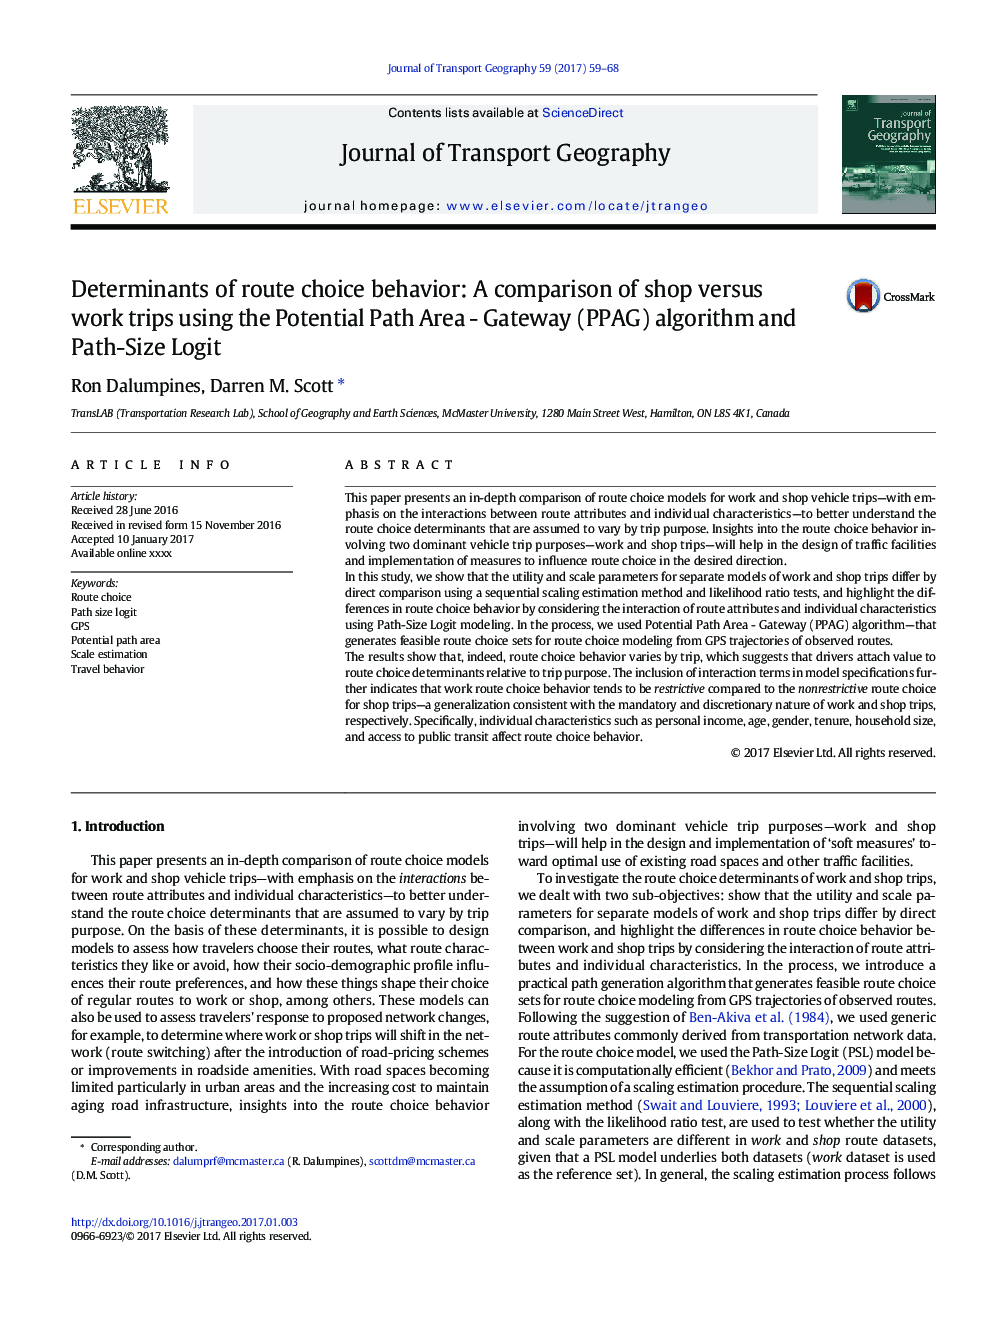 Determinants of route choice behavior: A comparison of shop versus work trips using the Potential Path Area - Gateway (PPAG) algorithm and Path-Size Logit